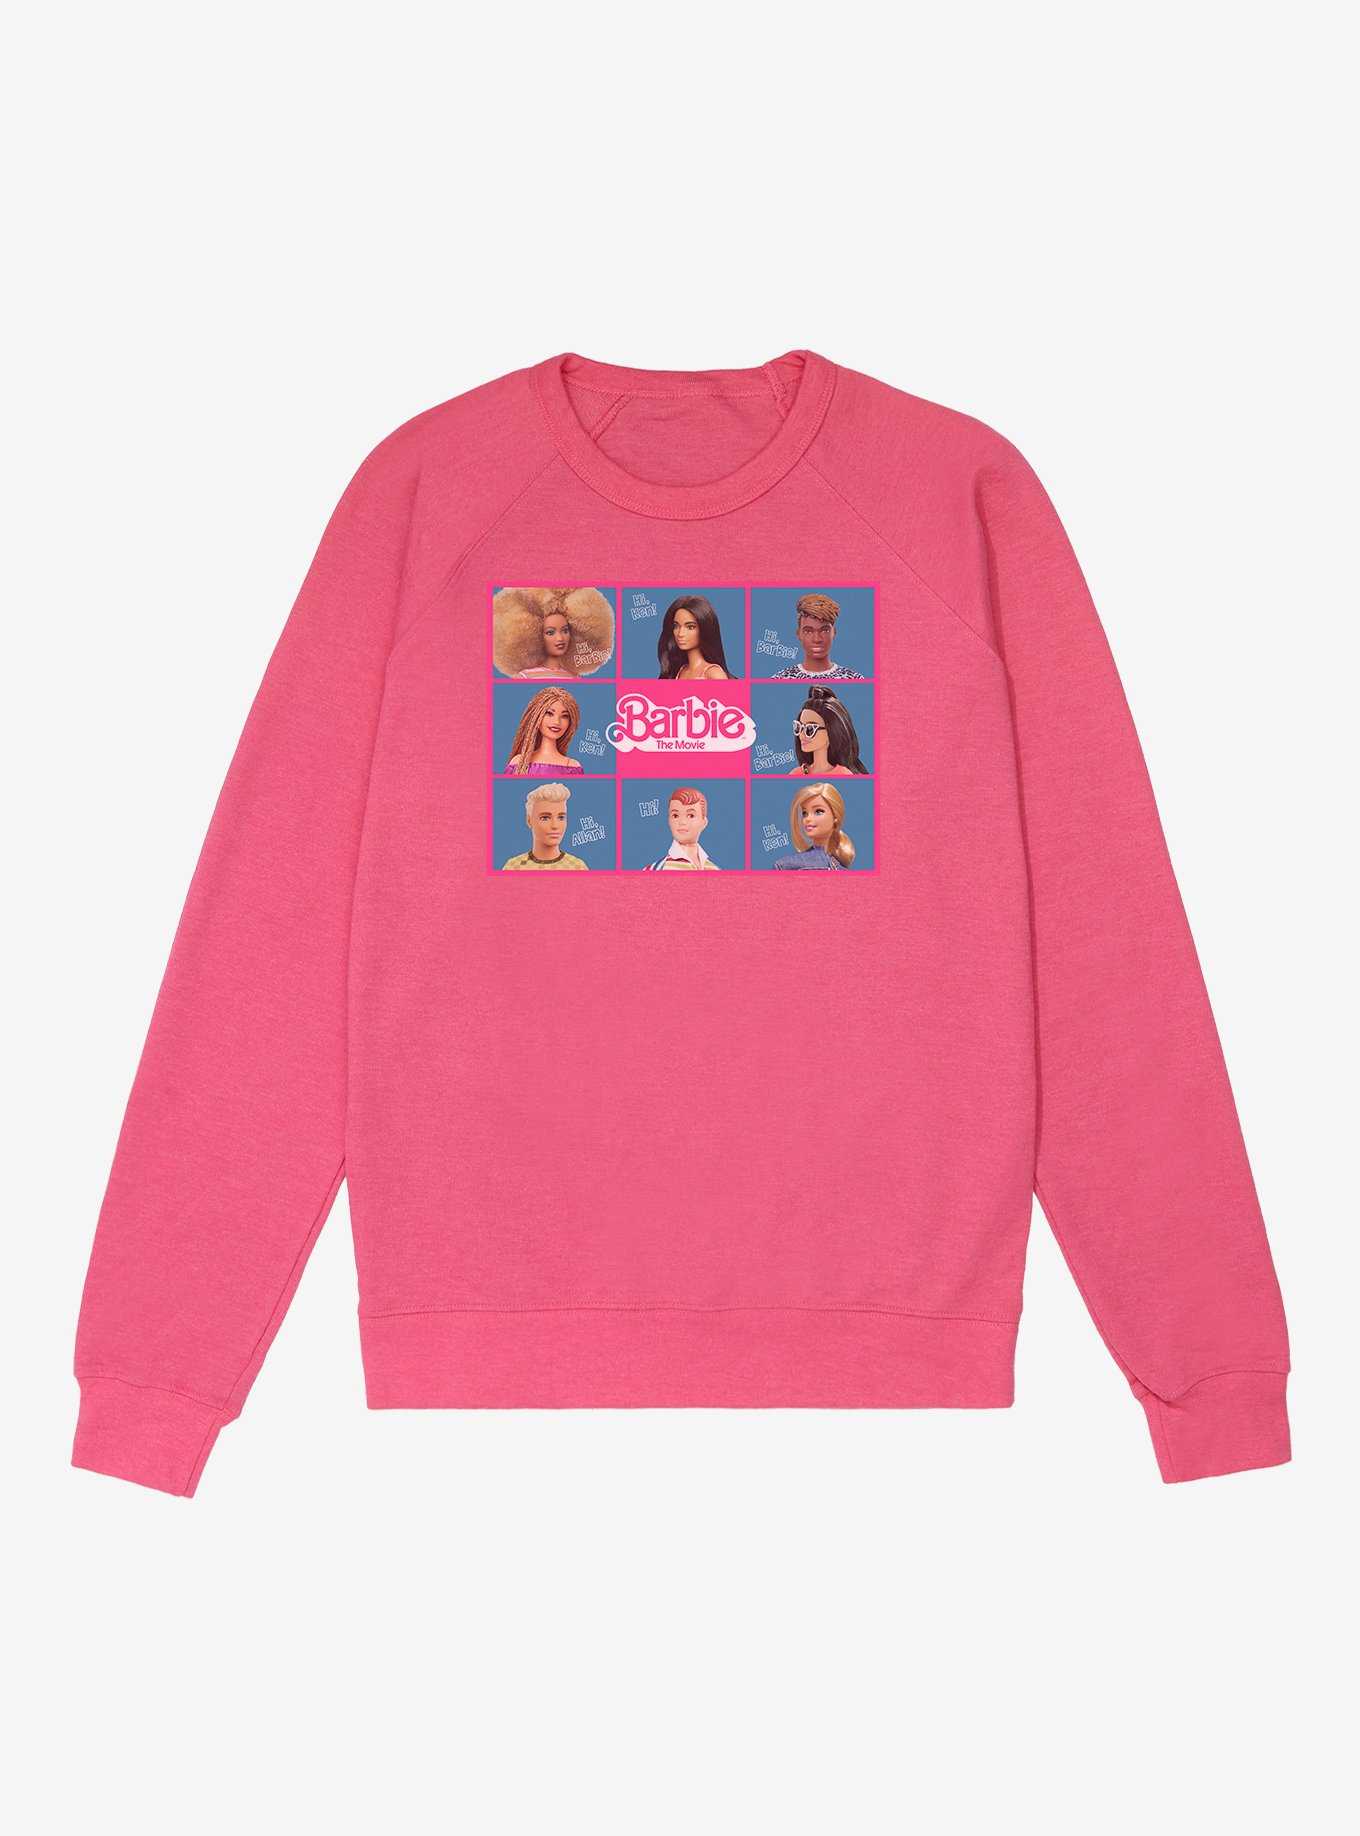 Barbie The Movie Barbie Bunch French Terry Sweatshirt, , hi-res